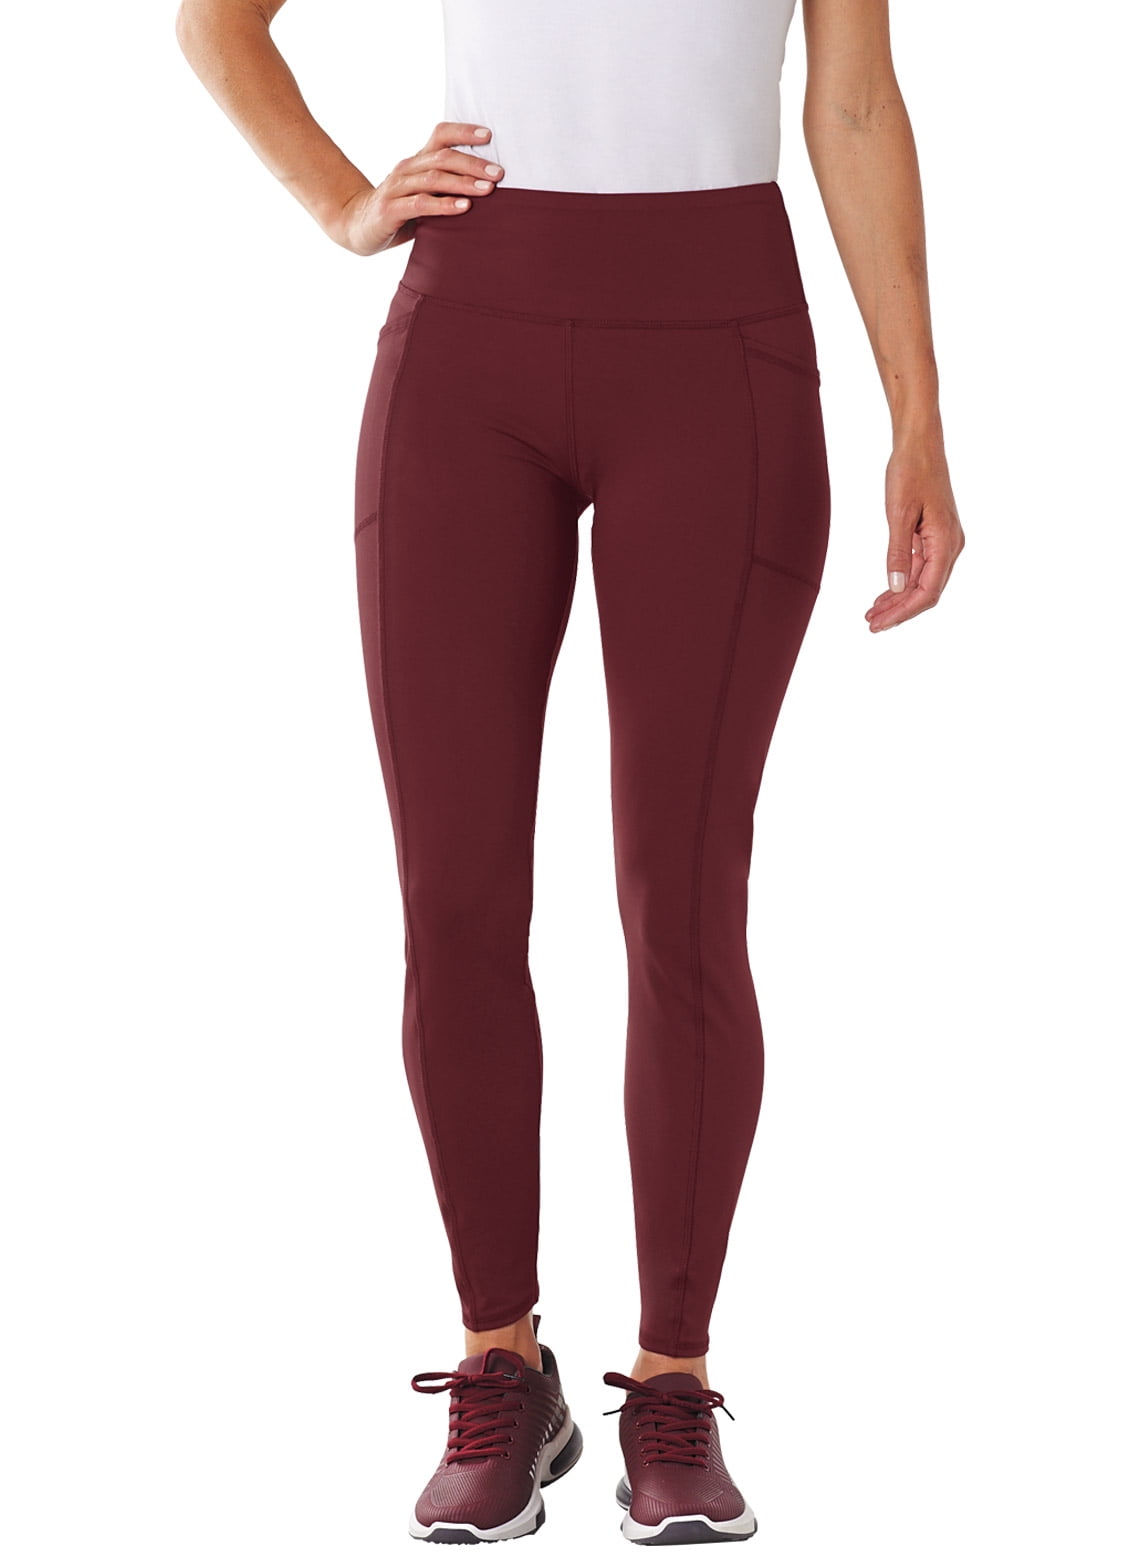 Athletic Pants by Freedom Fit Zone - Walmart.com